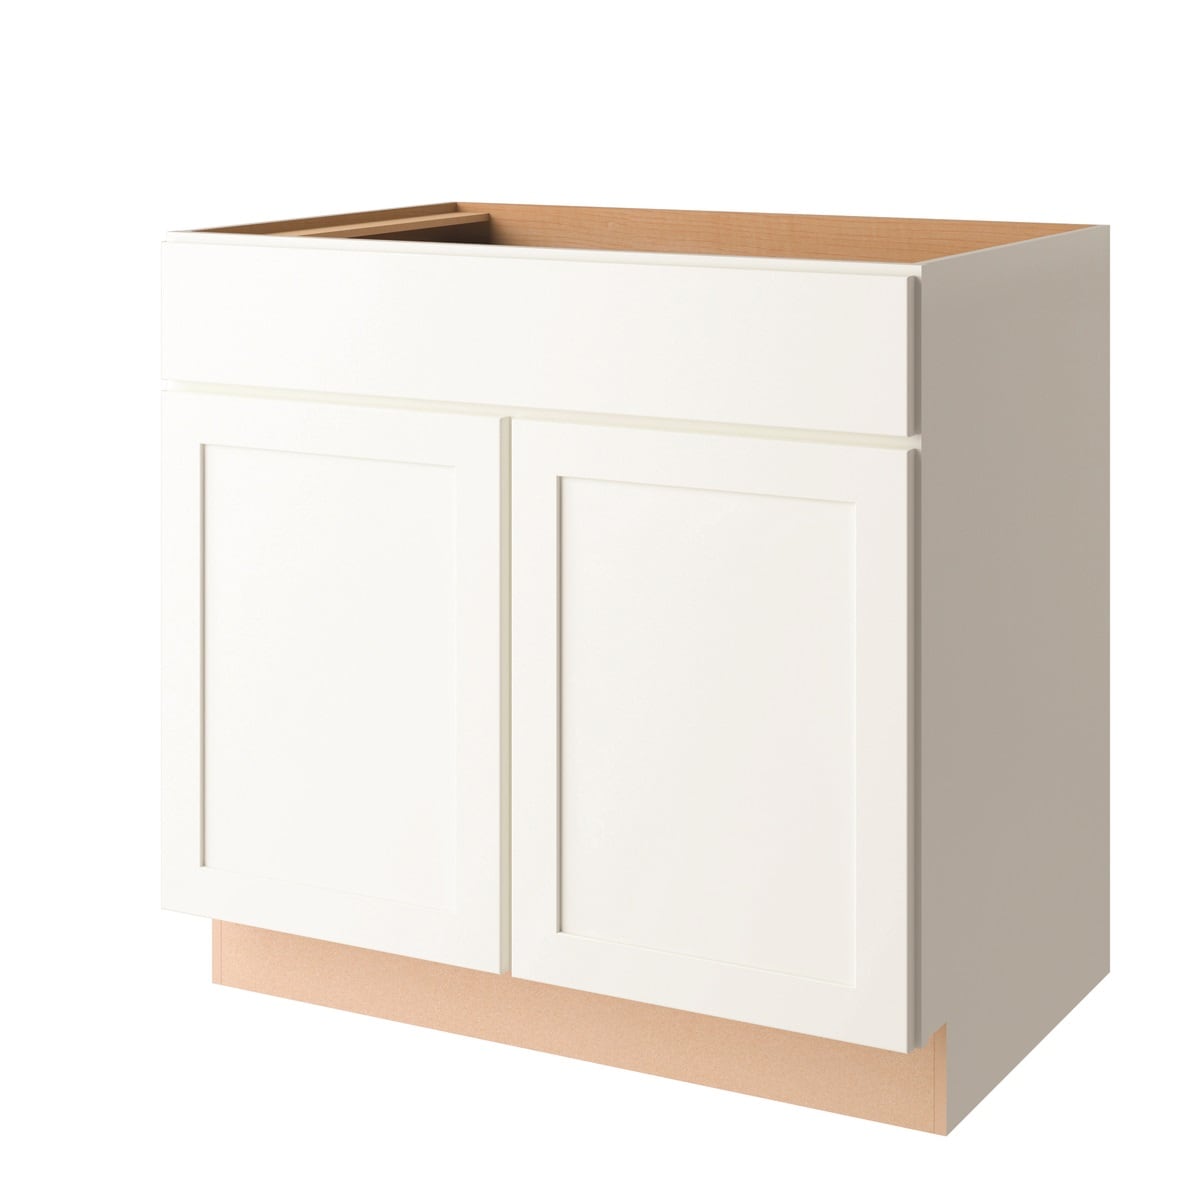 Base Pull Out Towel Rack Cabinet - Kitchen Craft  Kitchen desks, Kitchen  craft cabinets, Amazing bathrooms